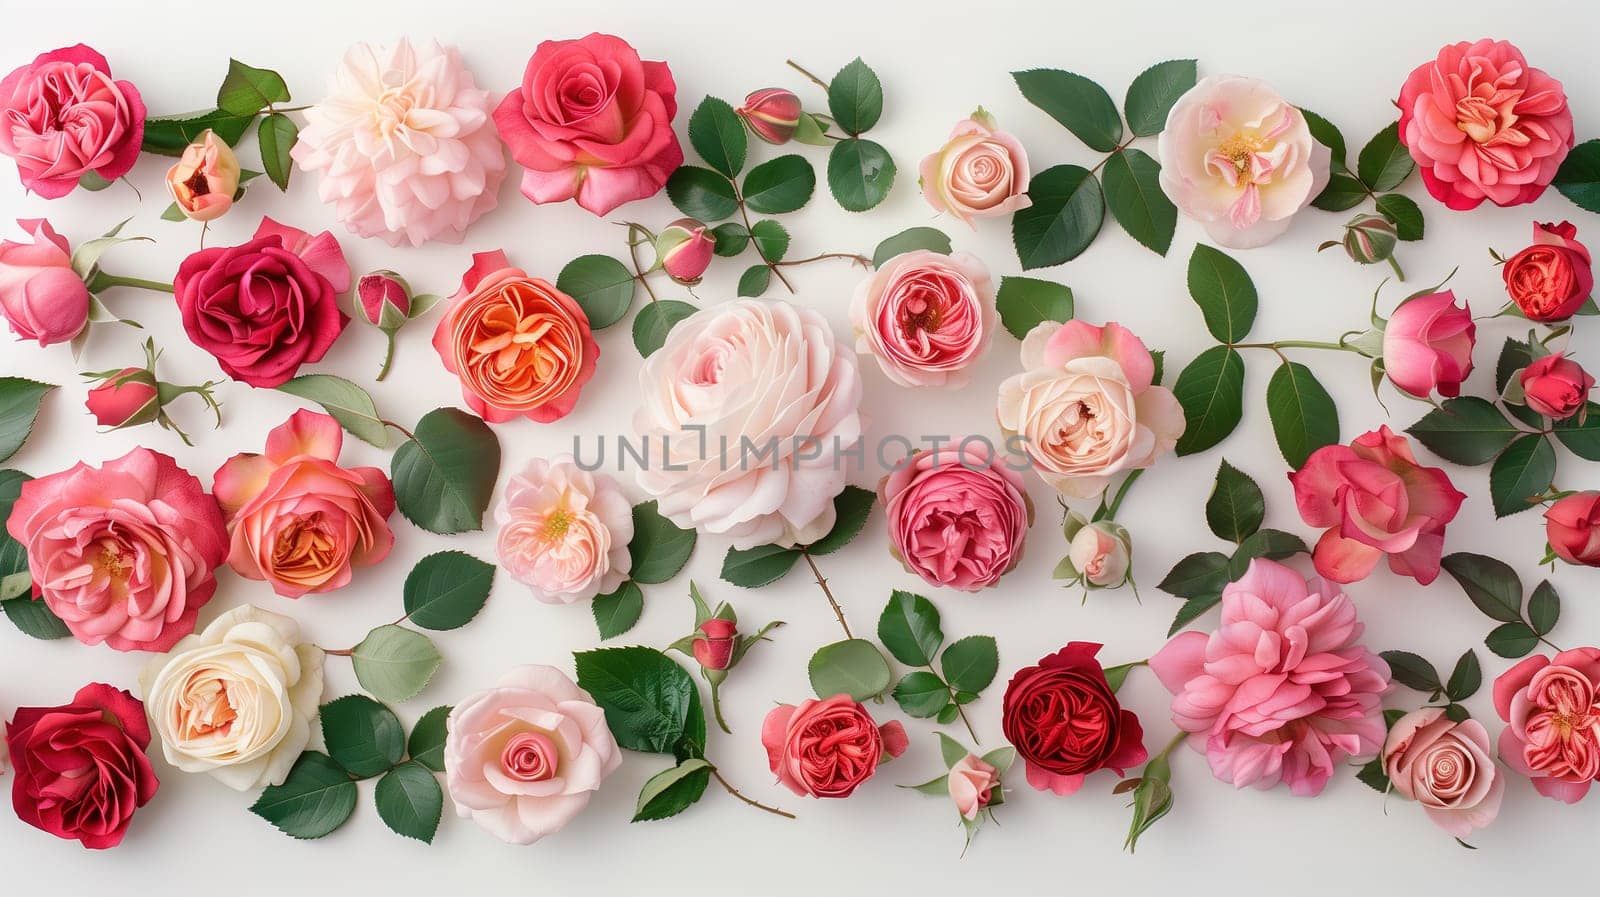 A variety of colorful flowers are hanging in a vertical arrangement on a wall. The blooms are vibrant and create a visually striking display against the backdrop of the wall.